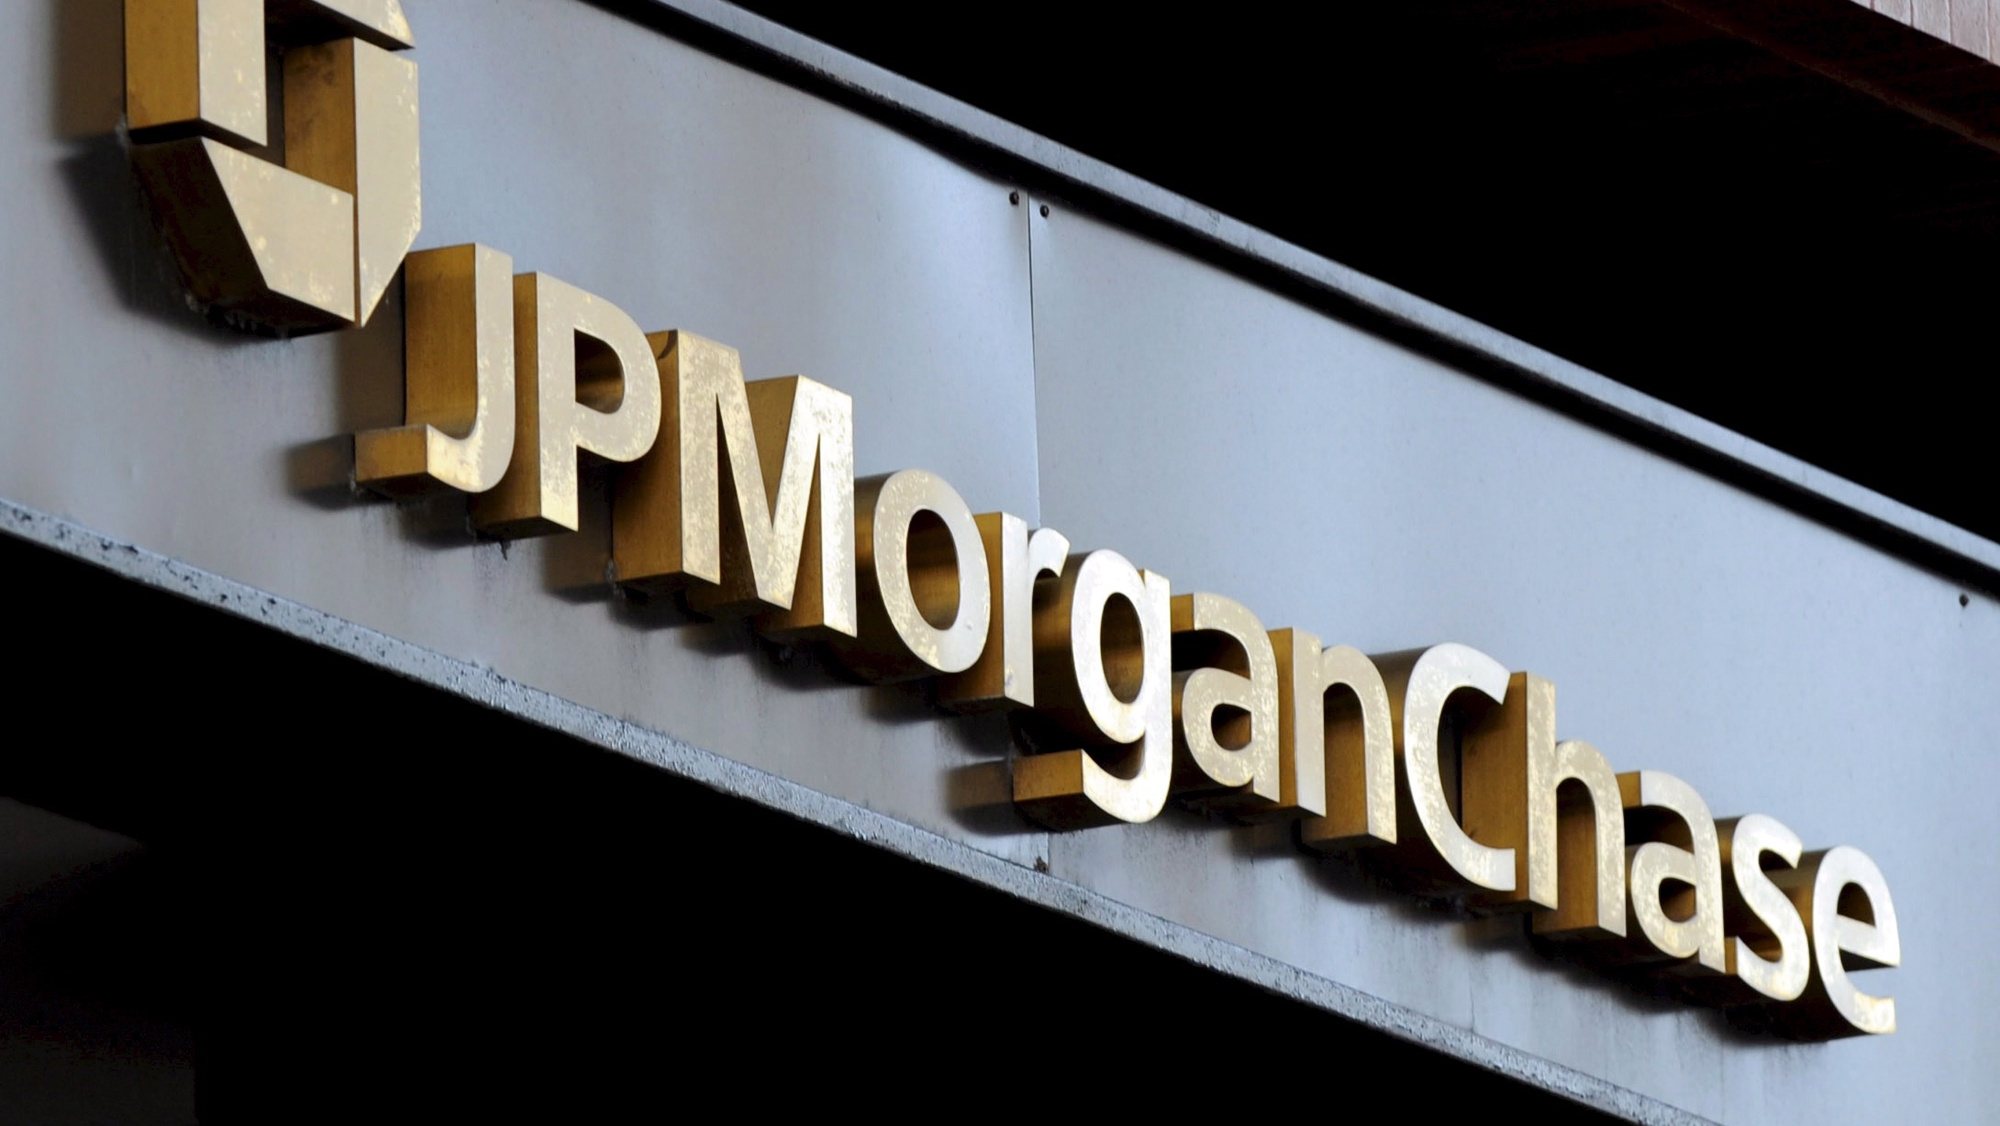 epa08126494 (FILE) - A file photograph dated 17 July 2008 of a sign for JP Morgan Chase bank in New York, New York, USA (reissued 13 January 2020). JPMorgan Chase is to release thei 4th quarter 2019 earnings on 14 January 2020.  EPA/JUSTIN LANE *** Local Caption *** 51110454